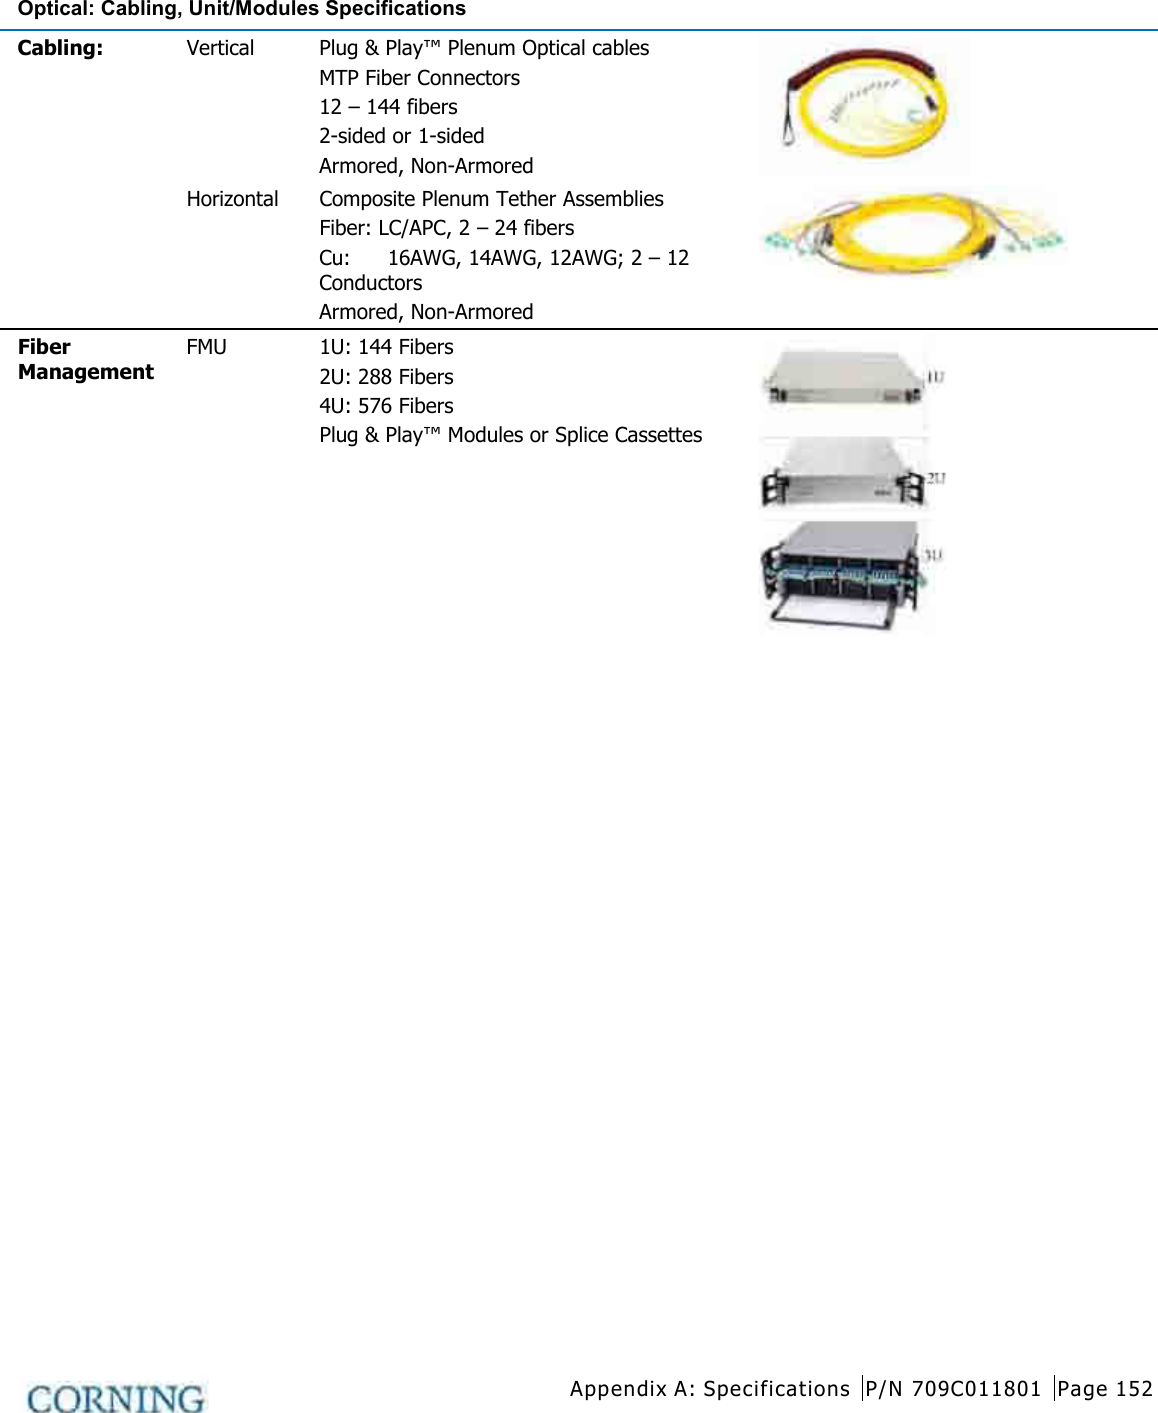  Appendix A: Specifications P/N 709C011801 Page 152    Optical: Cabling, Unit/Modules Specifications  Cabling: Vertical Plug &amp; Play™ Plenum Optical cables MTP Fiber Connectors 12 – 144 fibers 2-sided or 1-sided   Armored, Non-Armored   Horizontal Composite Plenum Tether Assemblies Fiber: LC/APC, 2 – 24 fibers   Cu:       16AWG, 14AWG, 12AWG; 2 – 12 Conductors Armored, Non-Armored  Fiber Management FMU 1U: 144 Fibers 2U: 288 Fibers   4U: 576 Fibers Plug &amp; Play™ Modules or Splice Cassettes     